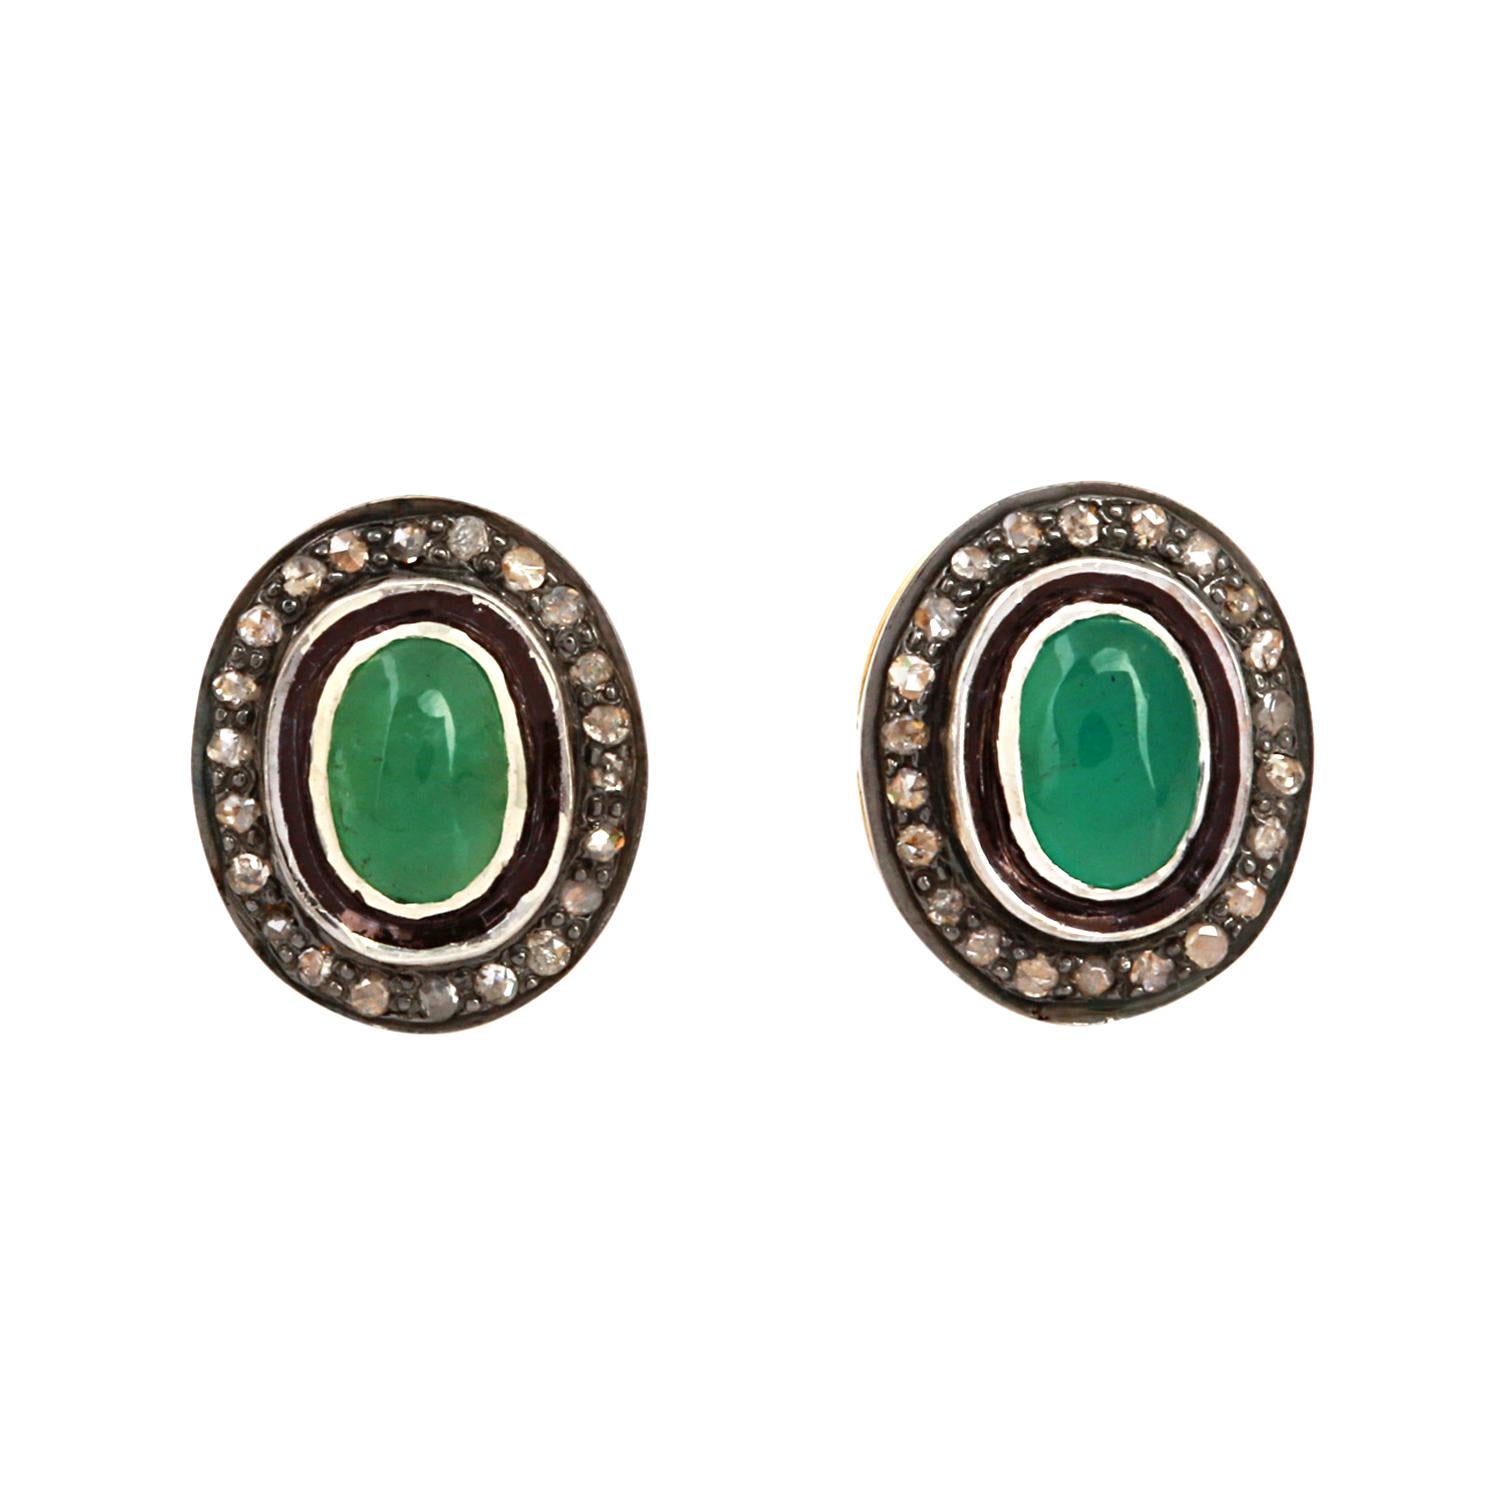 Emerald Stud Earring with Diamonds 0.55 Carat. Total gross weight of the stud earring is worth weight 4.440 grams gold with 0.290 grams and 925 sterling silver worth weight 3.54 grams and emerald with 2.50 carat.

Emerald is green in colour and the